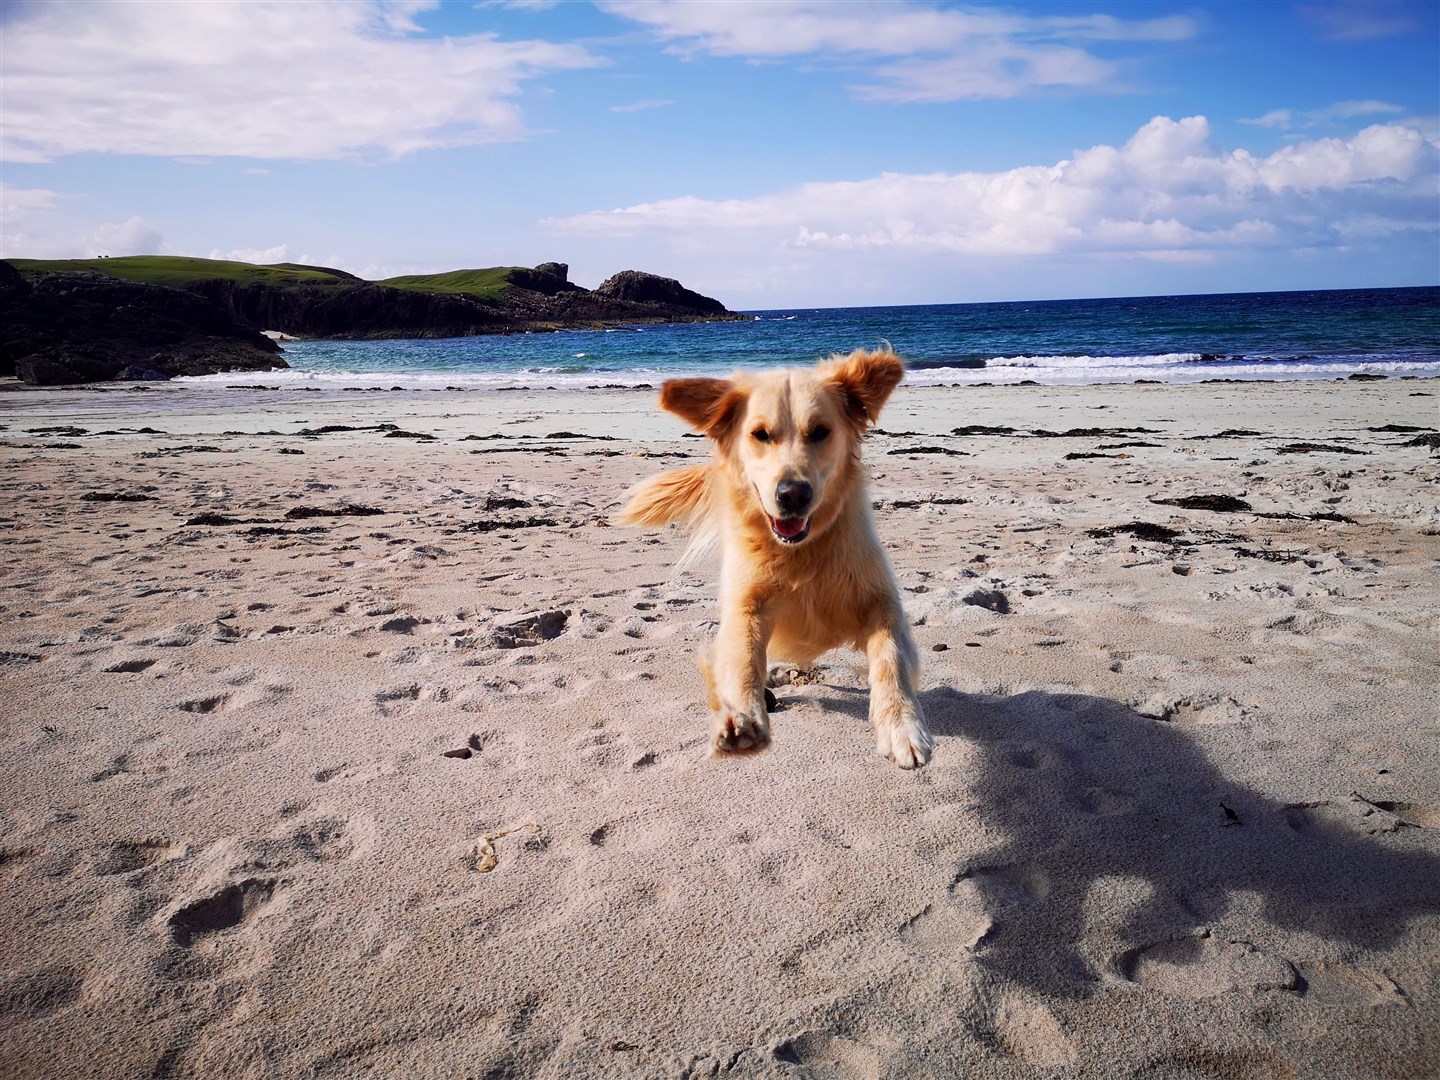 Piper at Clachtoll beach, owner Tom.